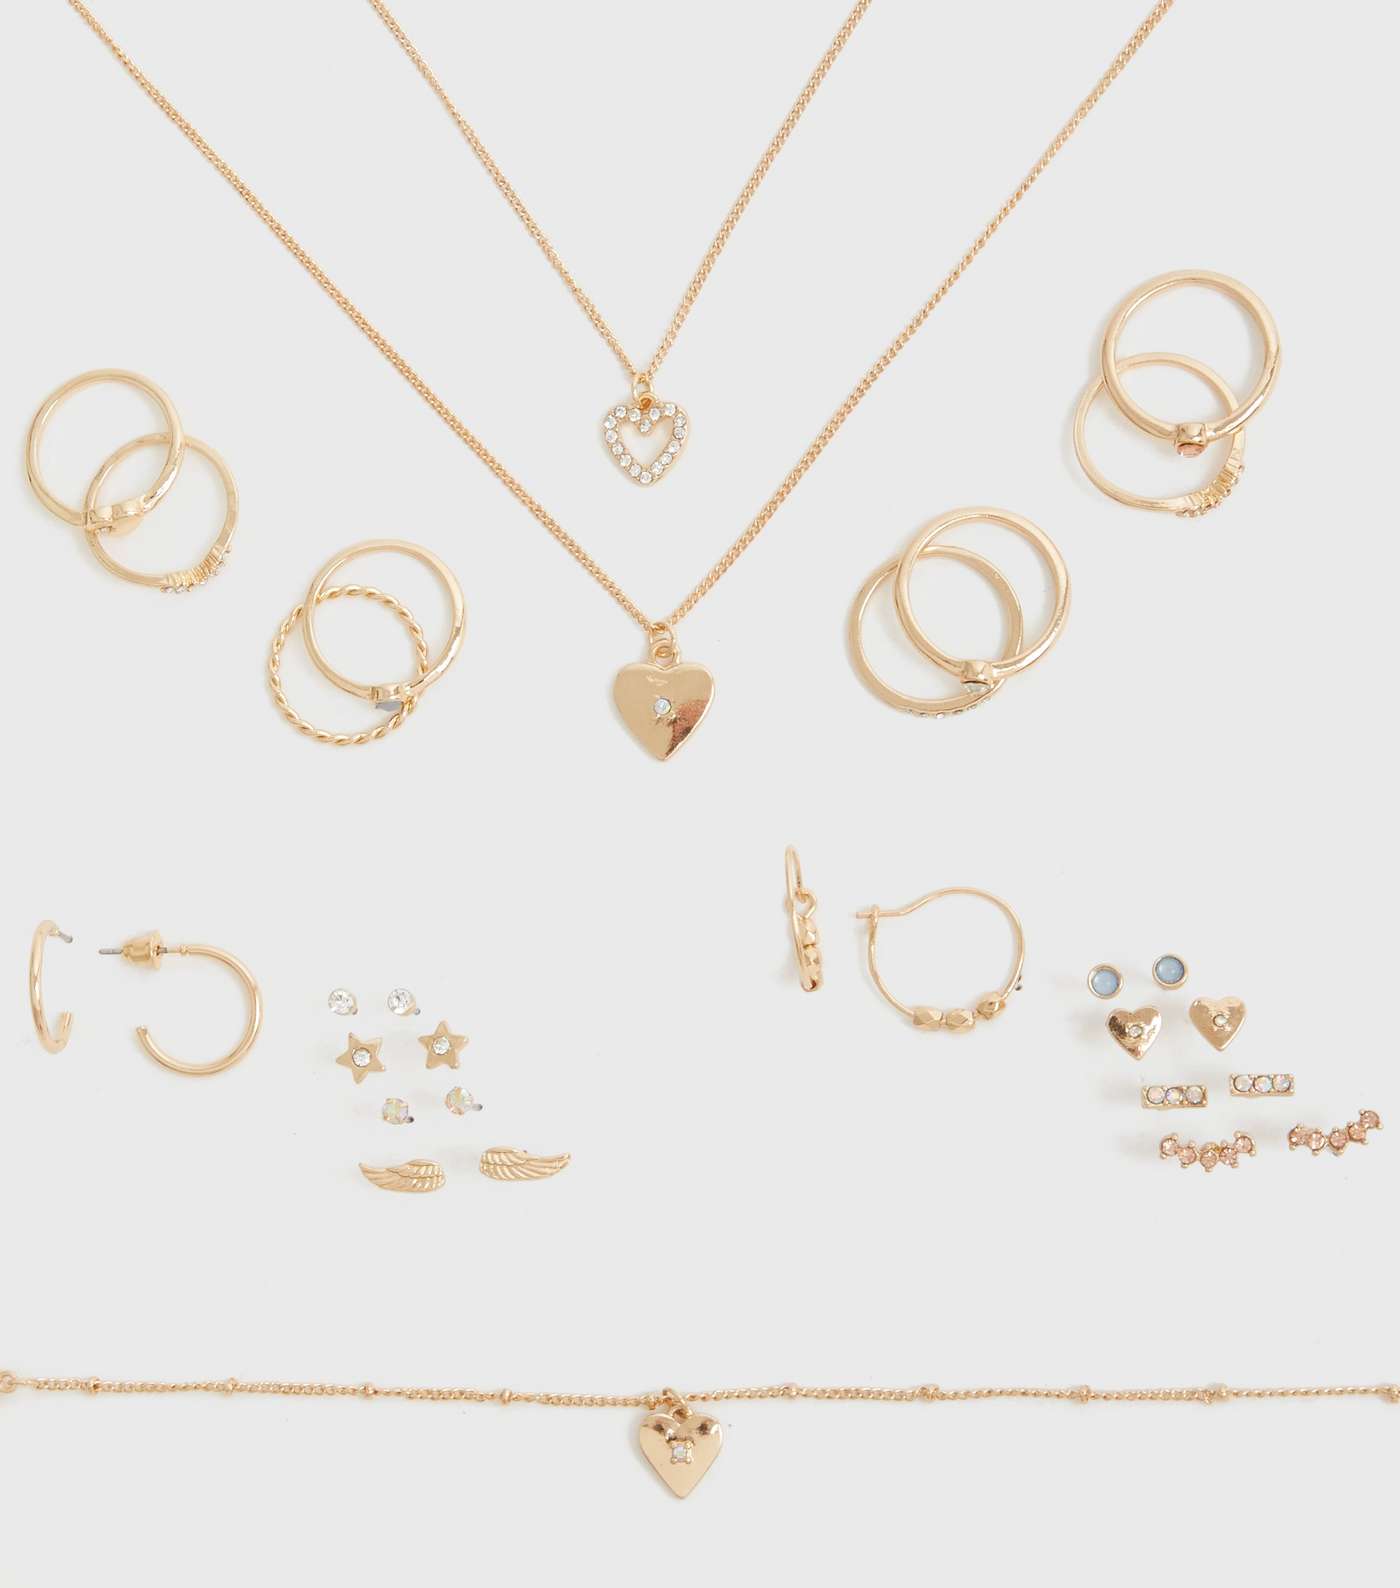 Gold Heart Pendant Necklace Ring and Earrings Set